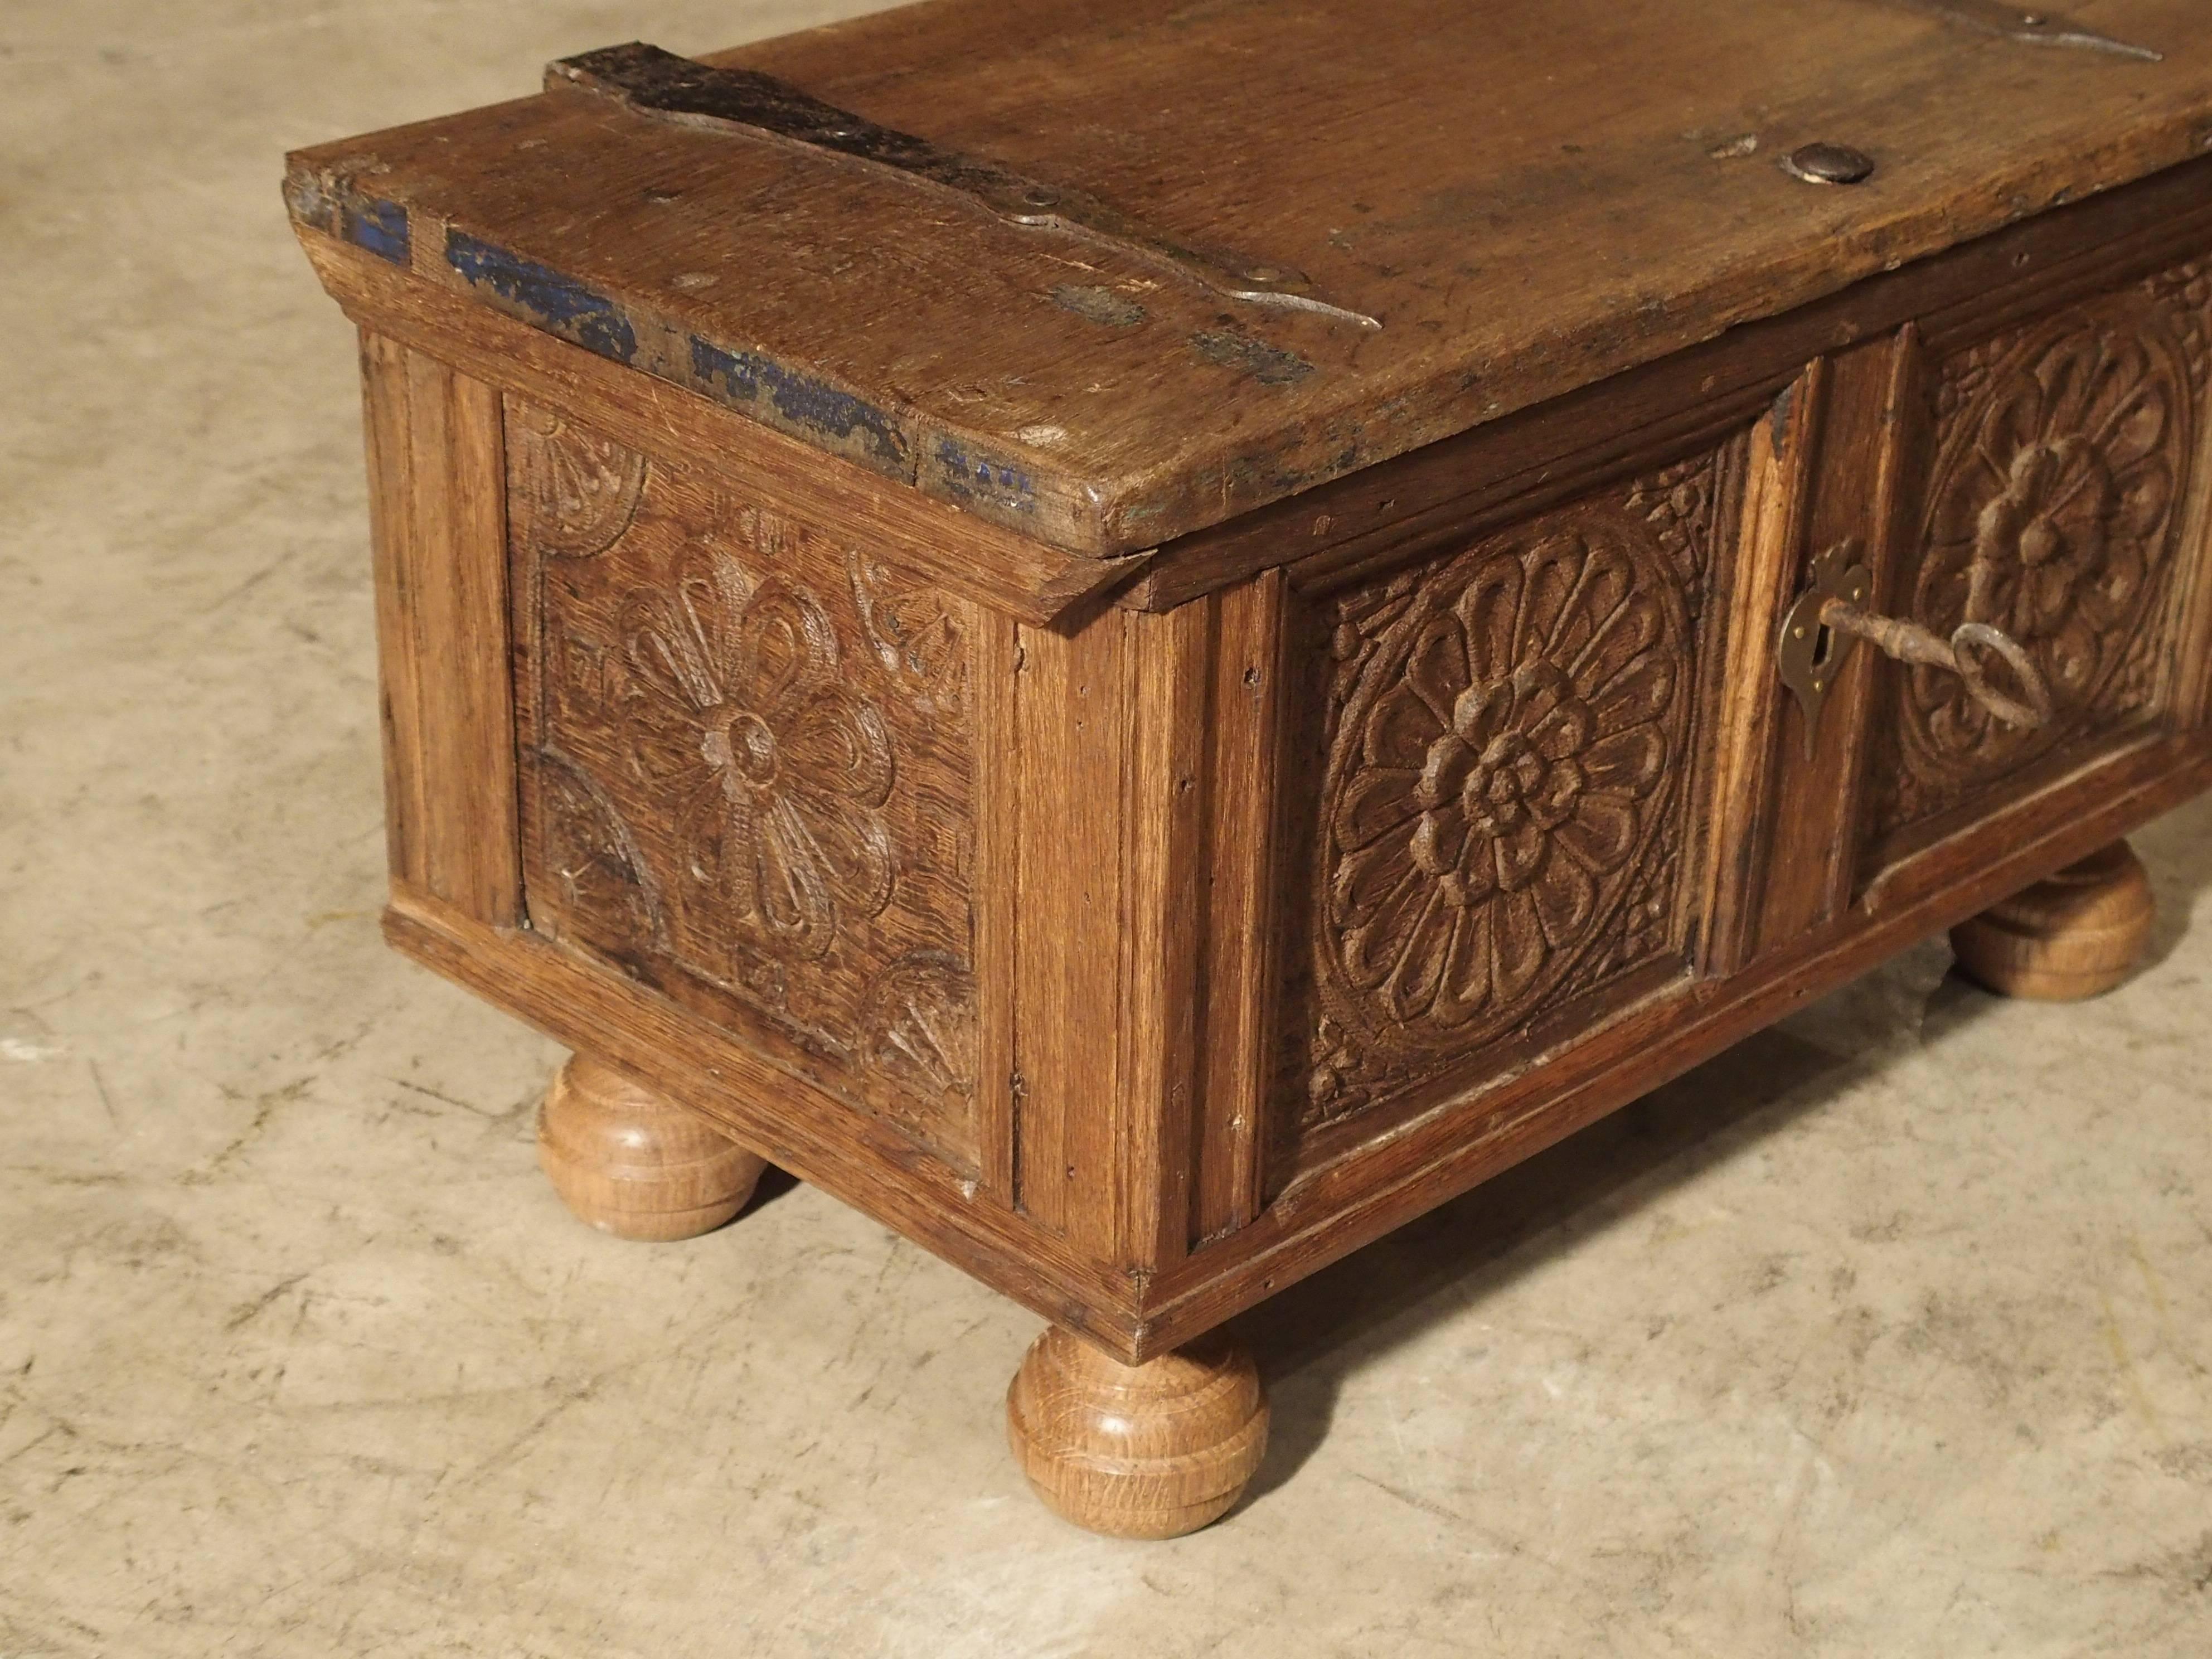 Hand-Carved Small Antique Oak Table Trunk from Spain, 17th Century